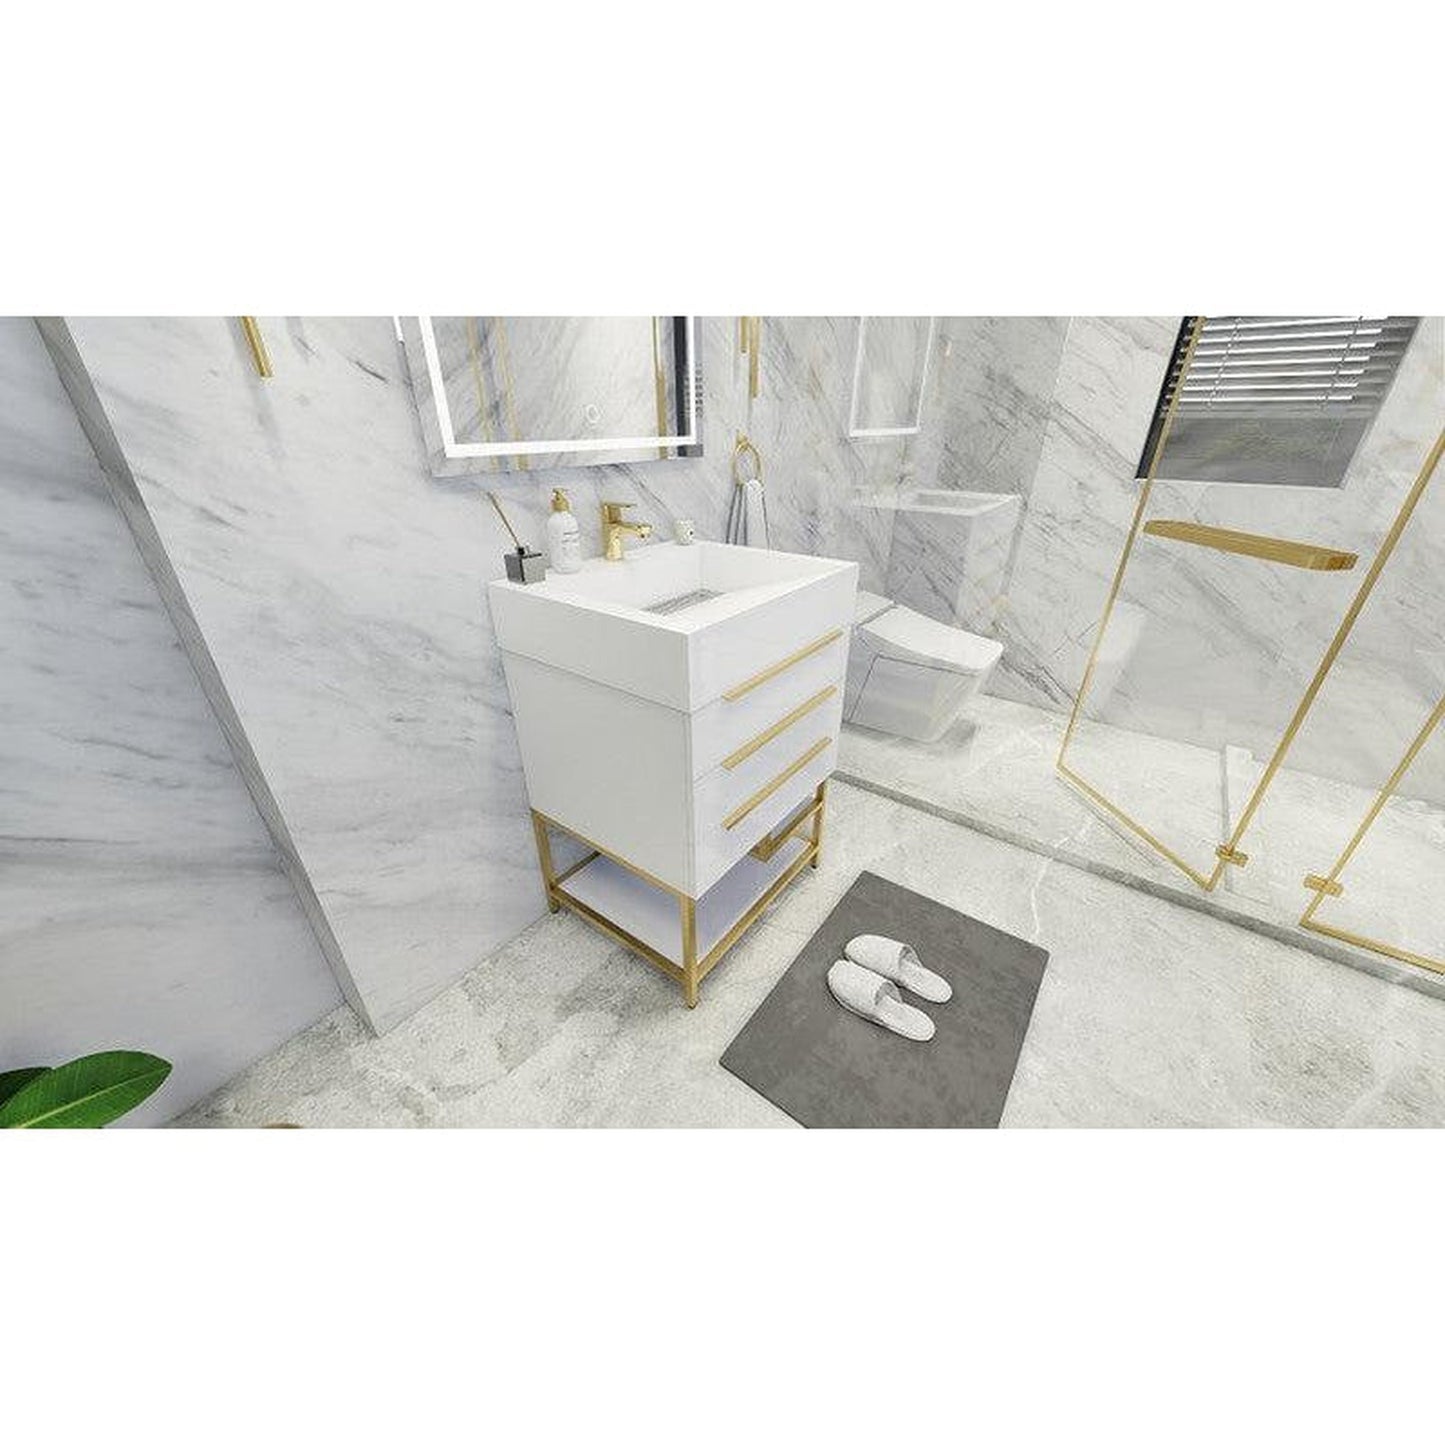 Moreno Bath Bethany 24" High Gloss White Freestanding Vanity With Single Reinforced White Acrylic Sink